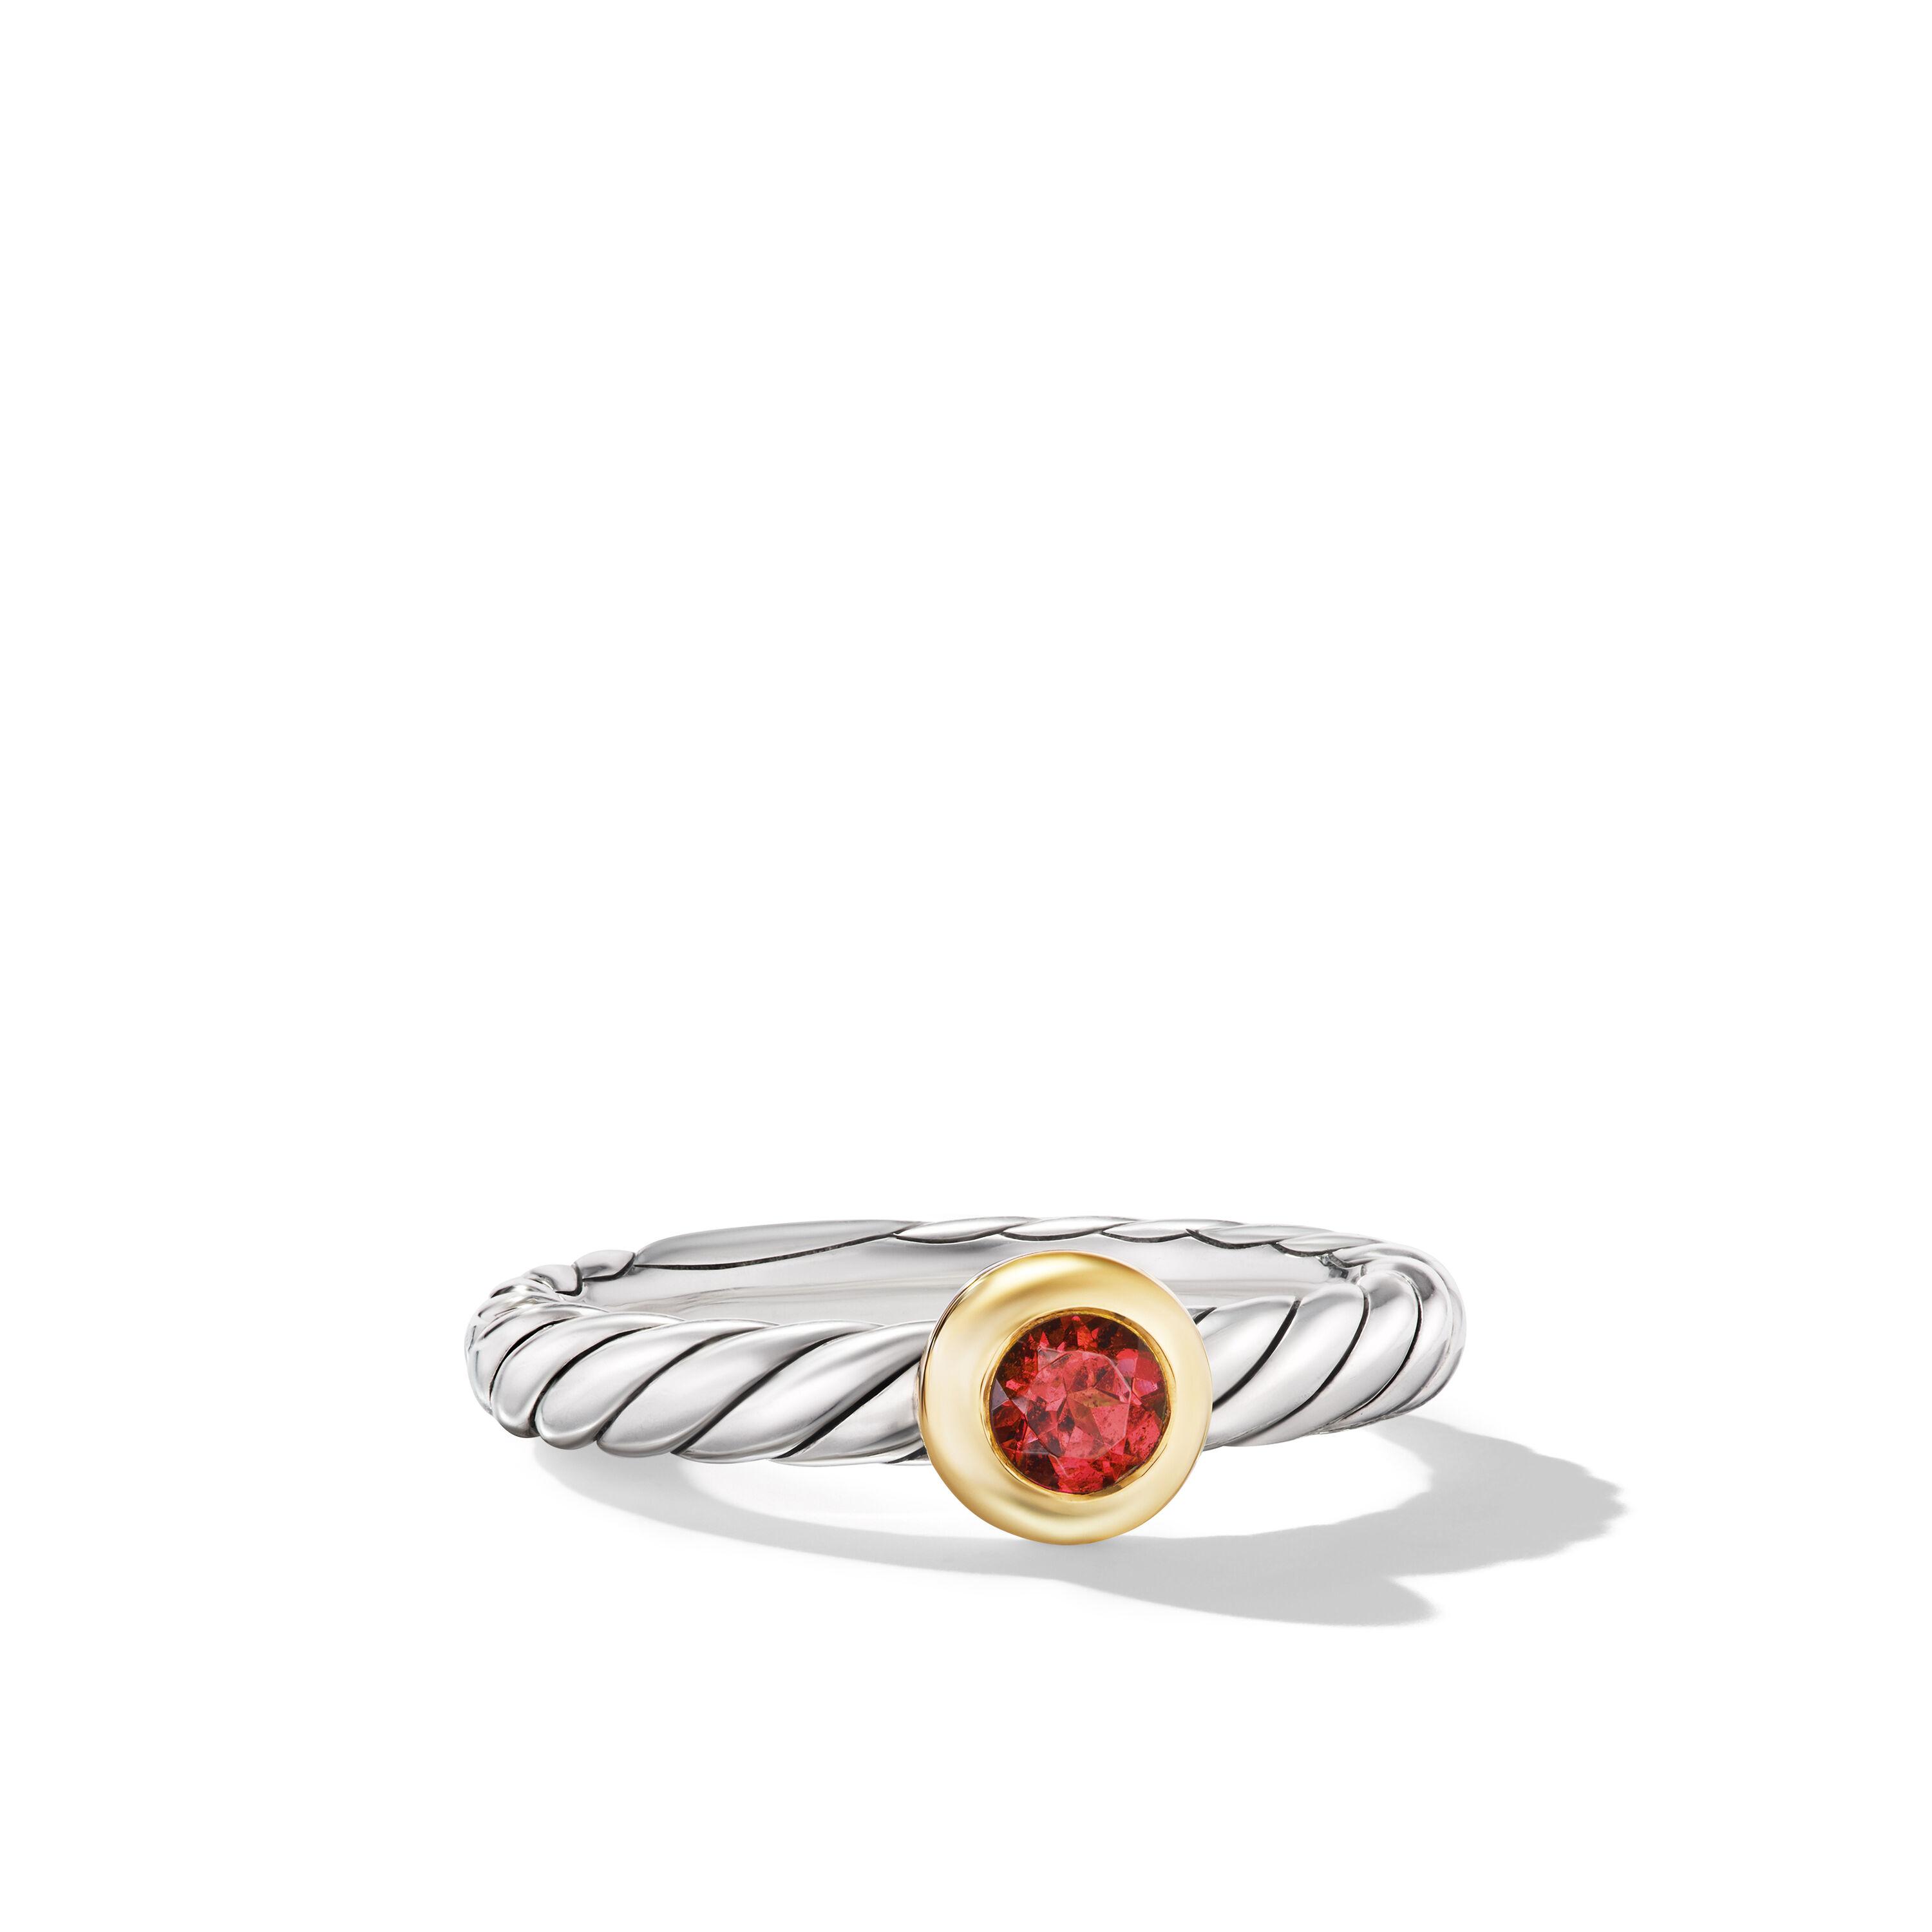 David Yurman Petite Cable Ring in Sterling Silver with 14K Yellow Gold and Garnet, Size 6